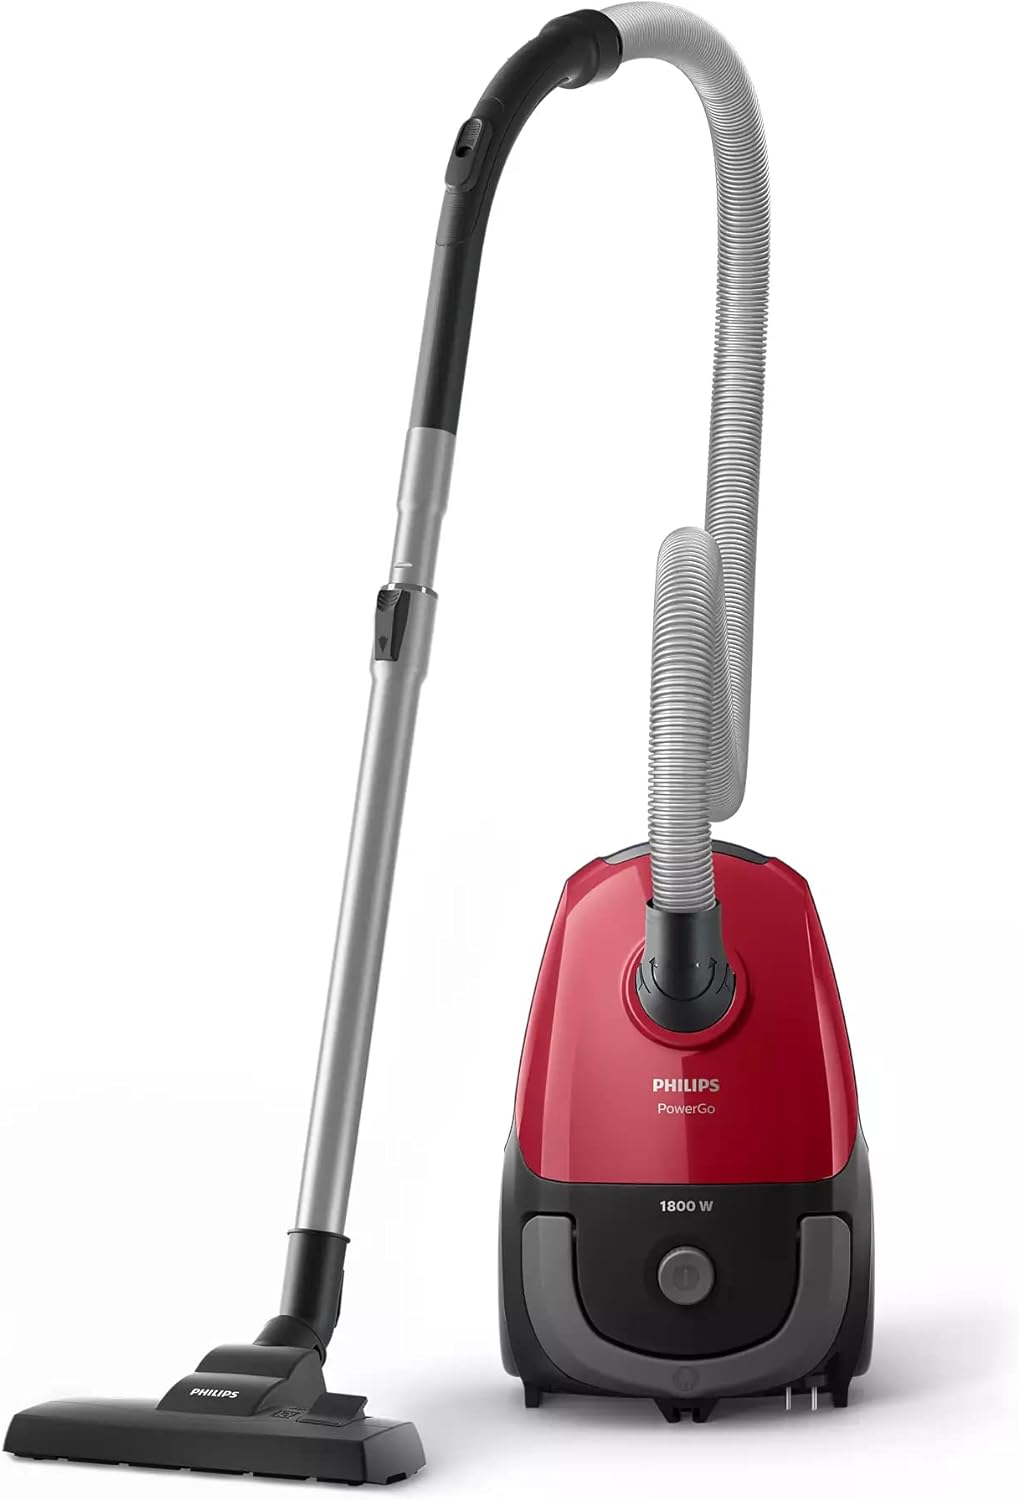 Philips 1800W Bagless Vacuum Cleaner - Compact and Lightweight - 3L Dust Bag - 2000 Series FC8293/61